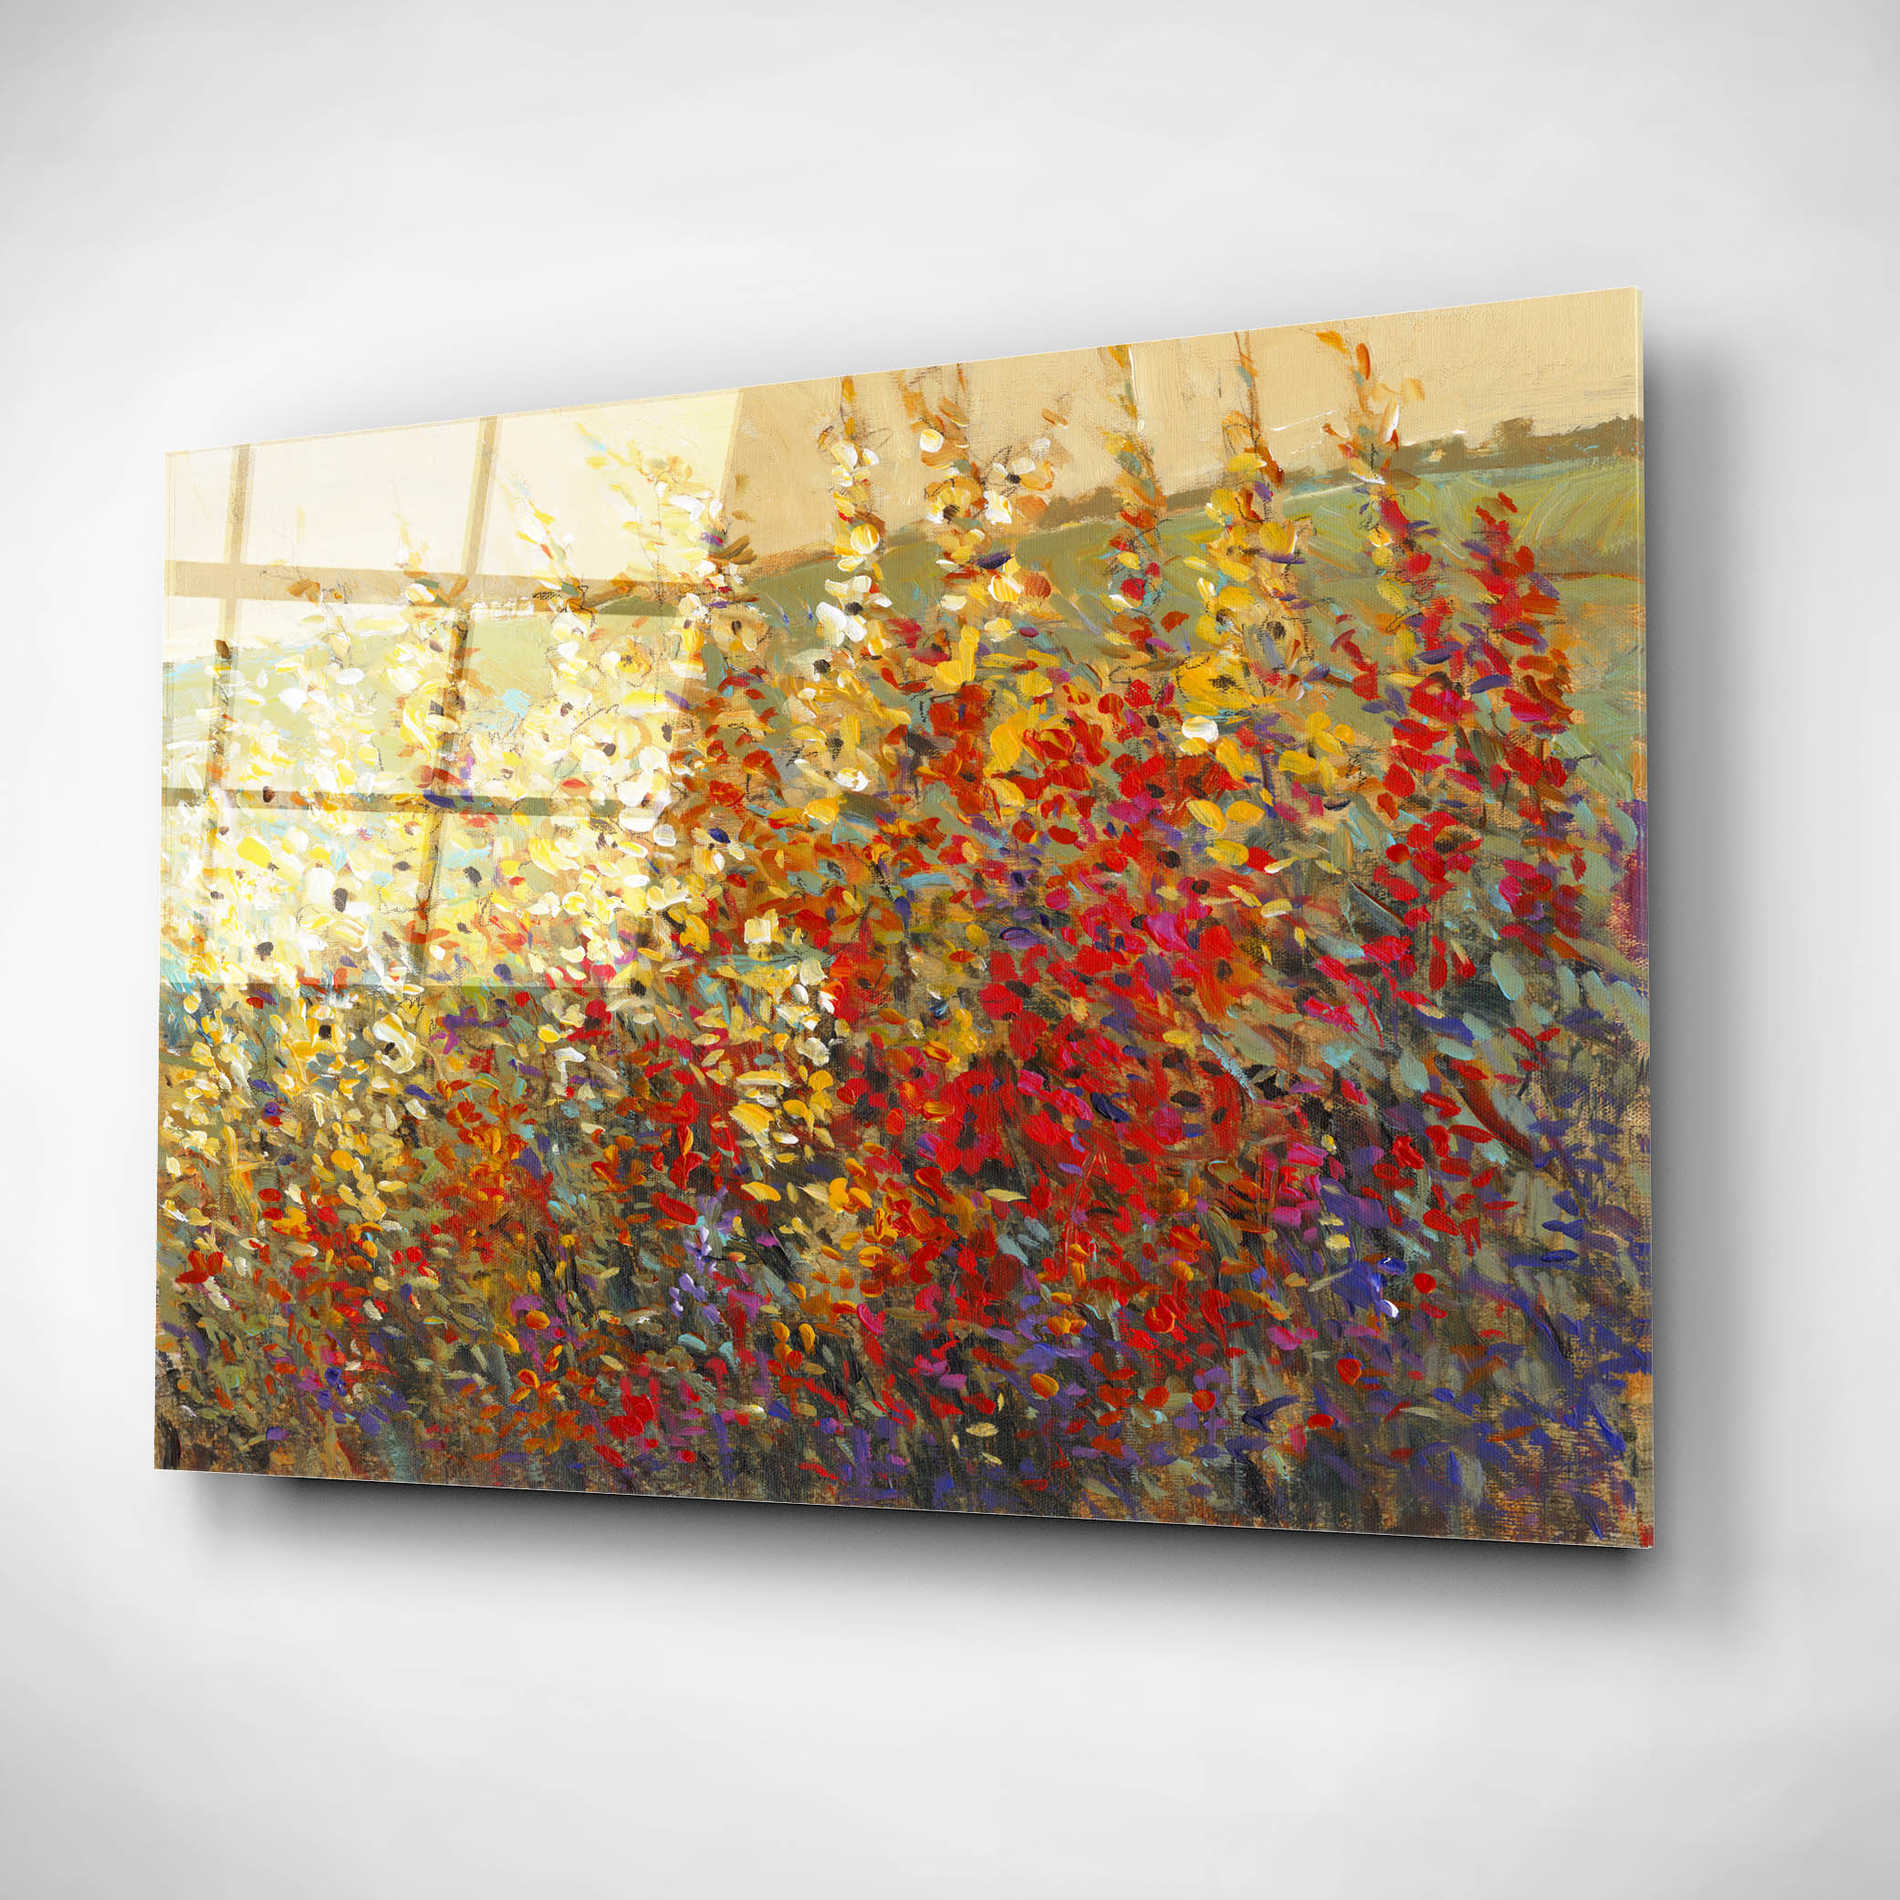 Epic Art 'Field of Spring Flowers I' by Tim O'Toole, Acrylic Glass Wall Art,24x16